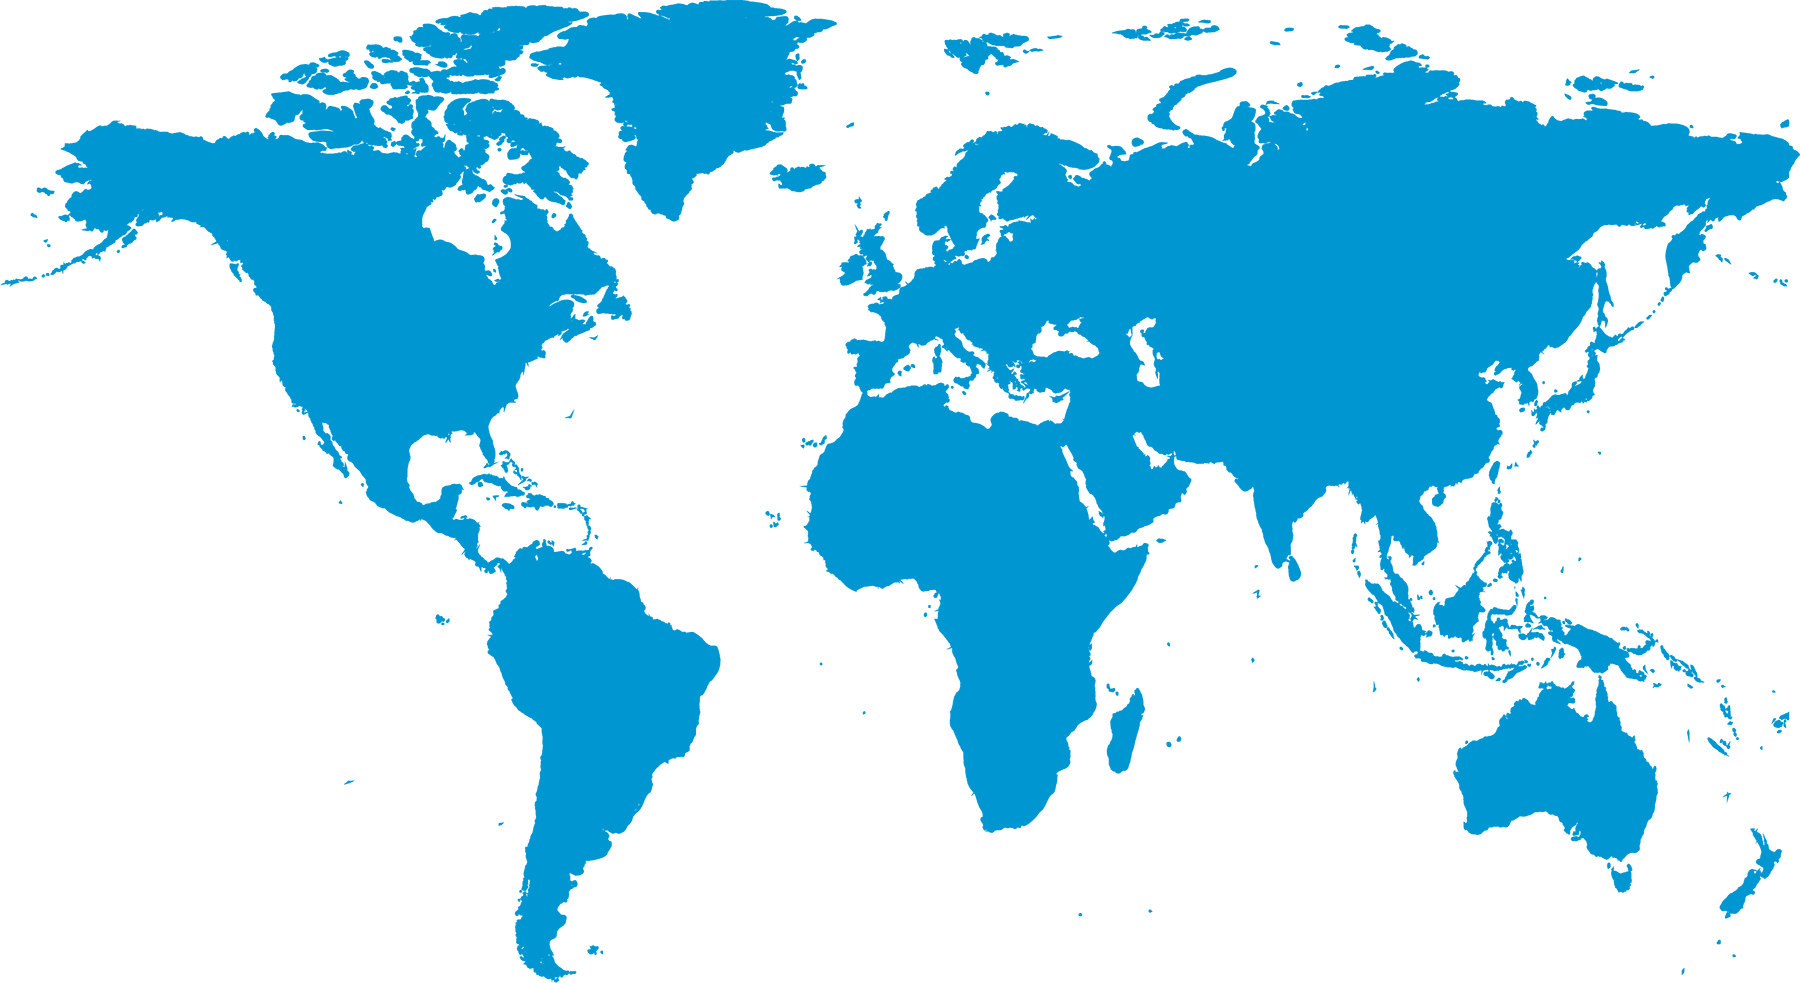 The world Map